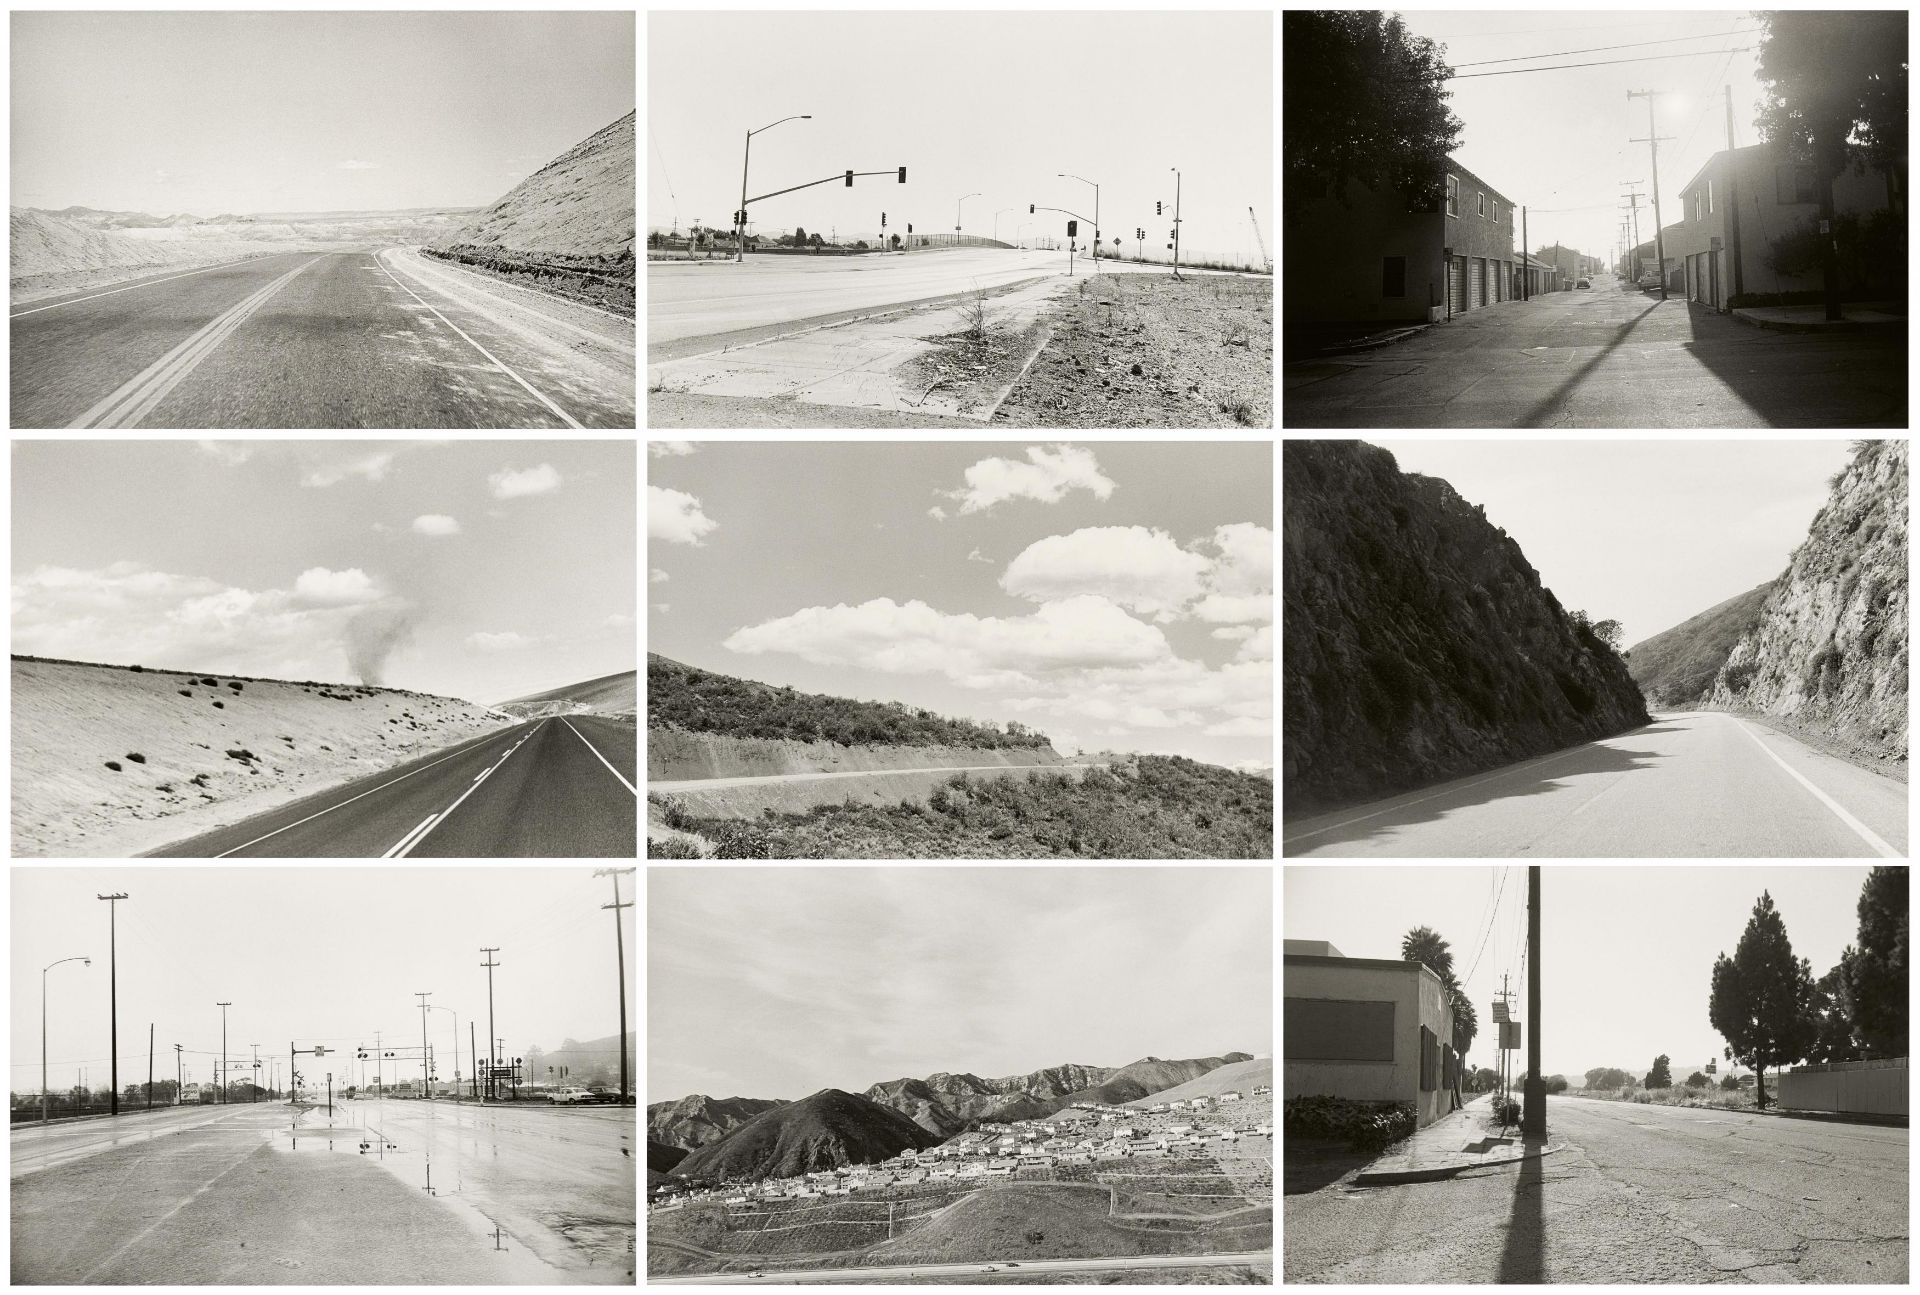 Henry Wessel: Continental Divide